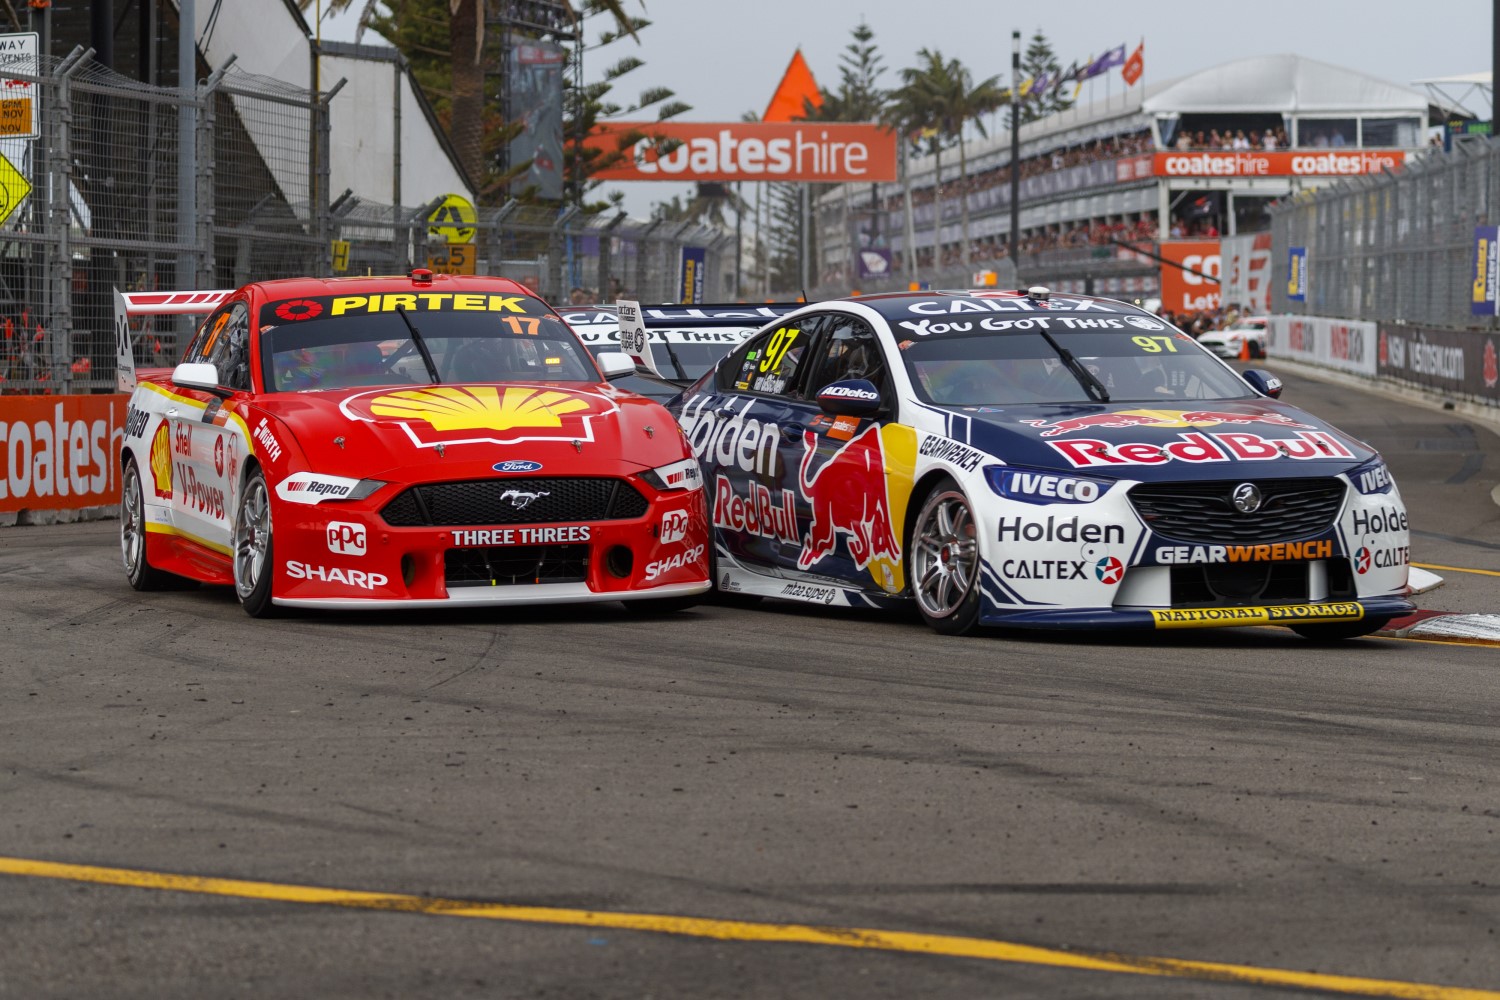 Whincup muscles ahead at first chicane